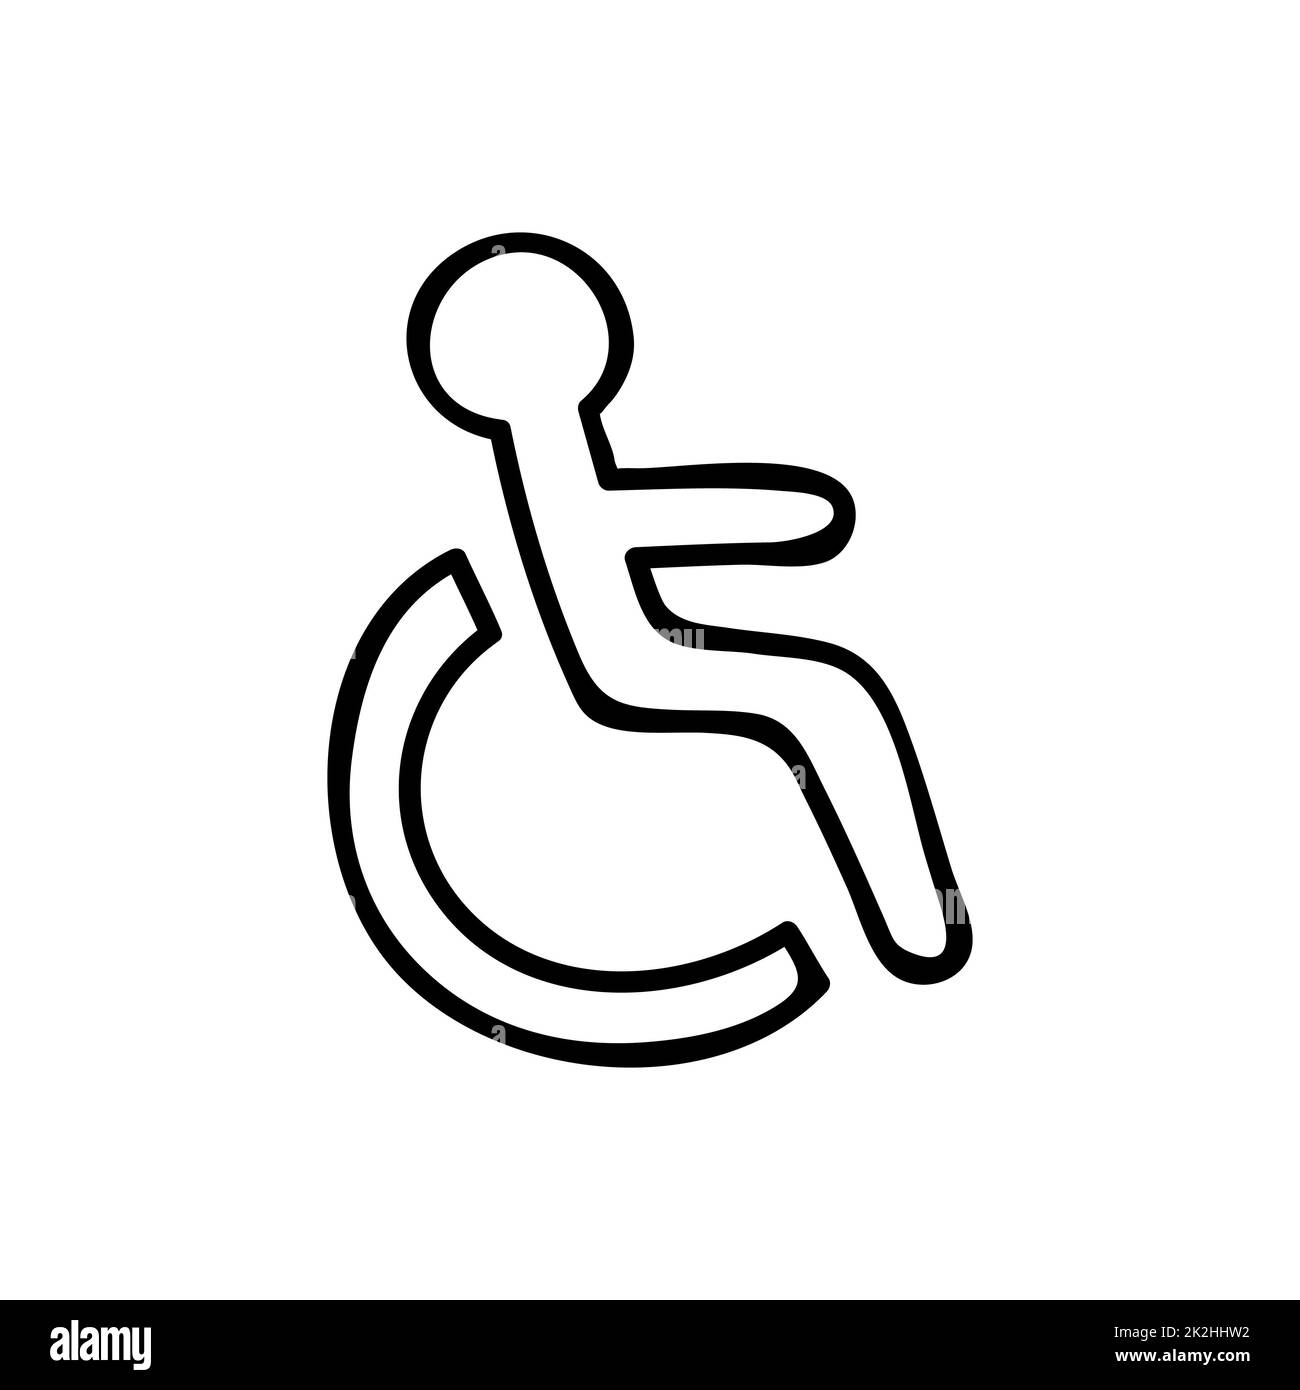 Thin line icon of disability symbol on white background - Vector Stock Photo